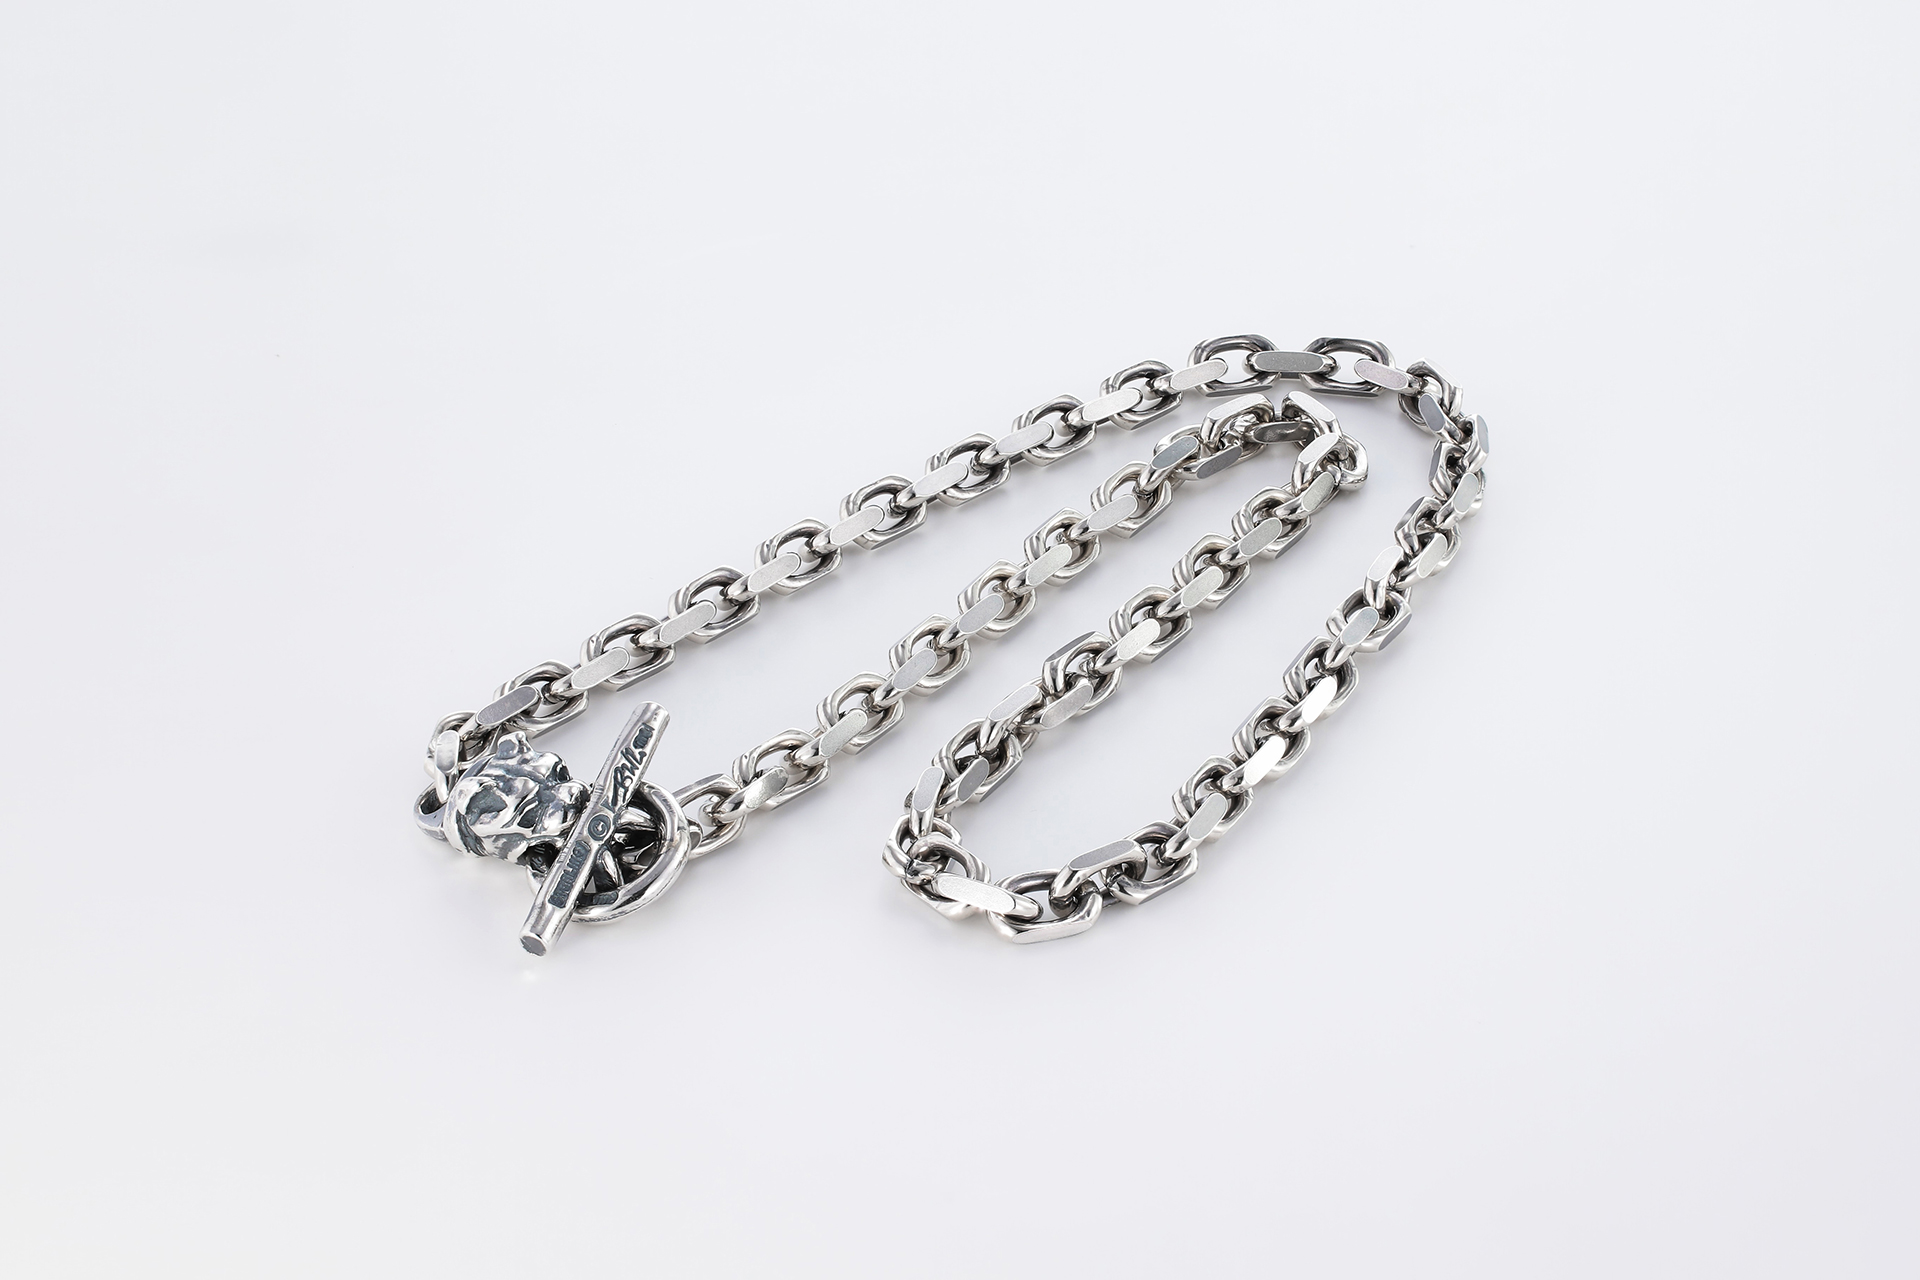 N882（18 inch）/ Square Chain with Small Dog Head Necklace 